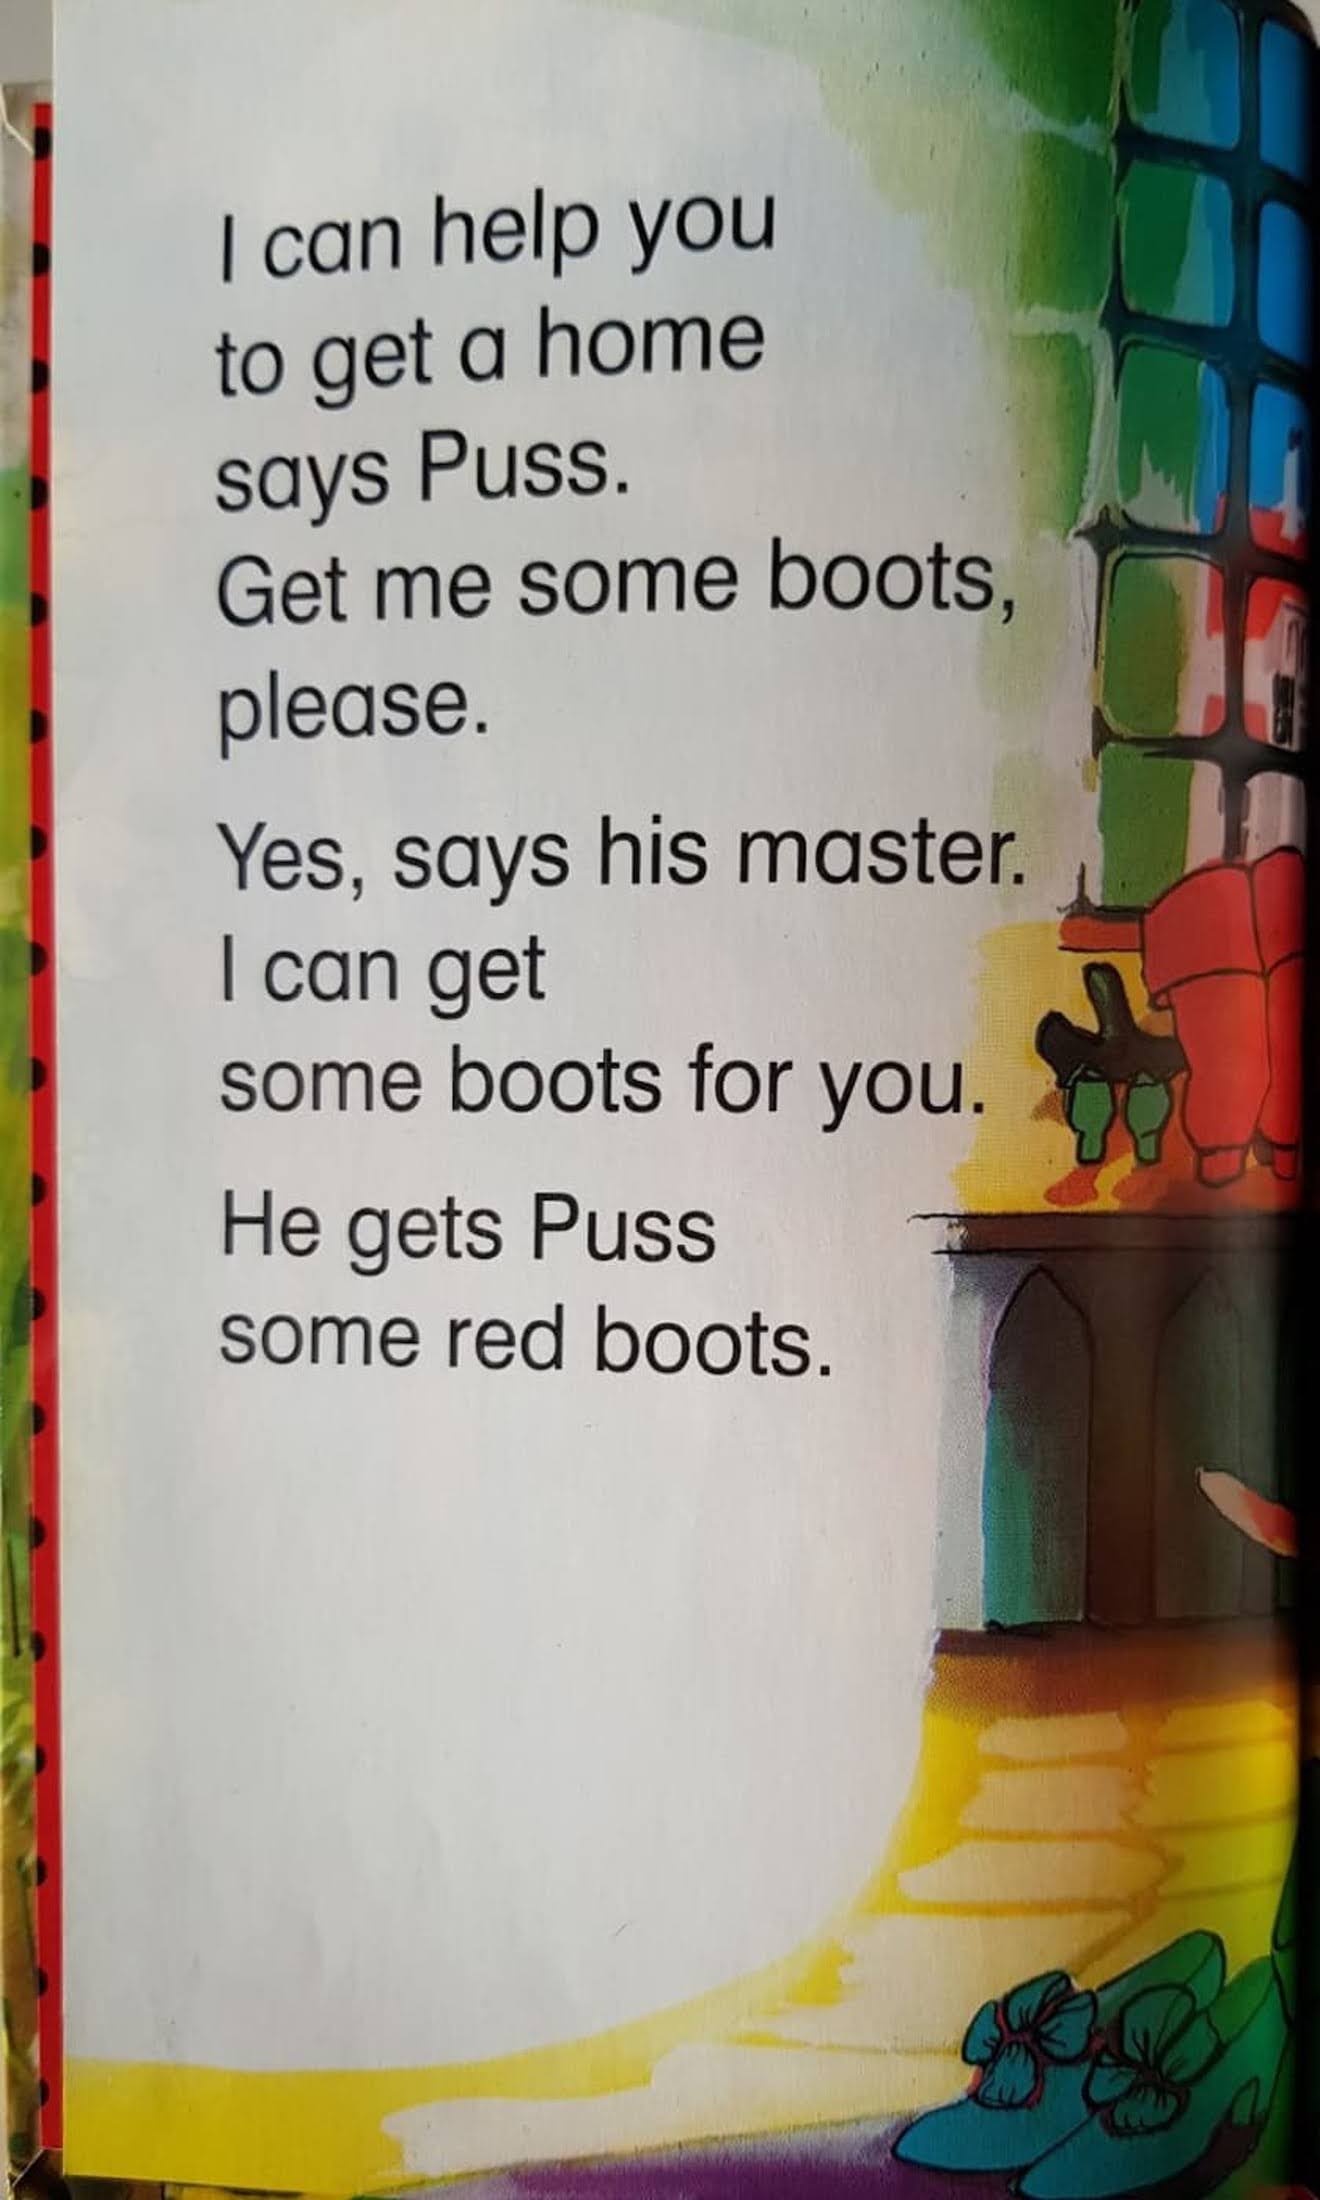 Read it Yourself - Puss in Boots Like New, 12+ Yrs Ladybird  (6541798834361)